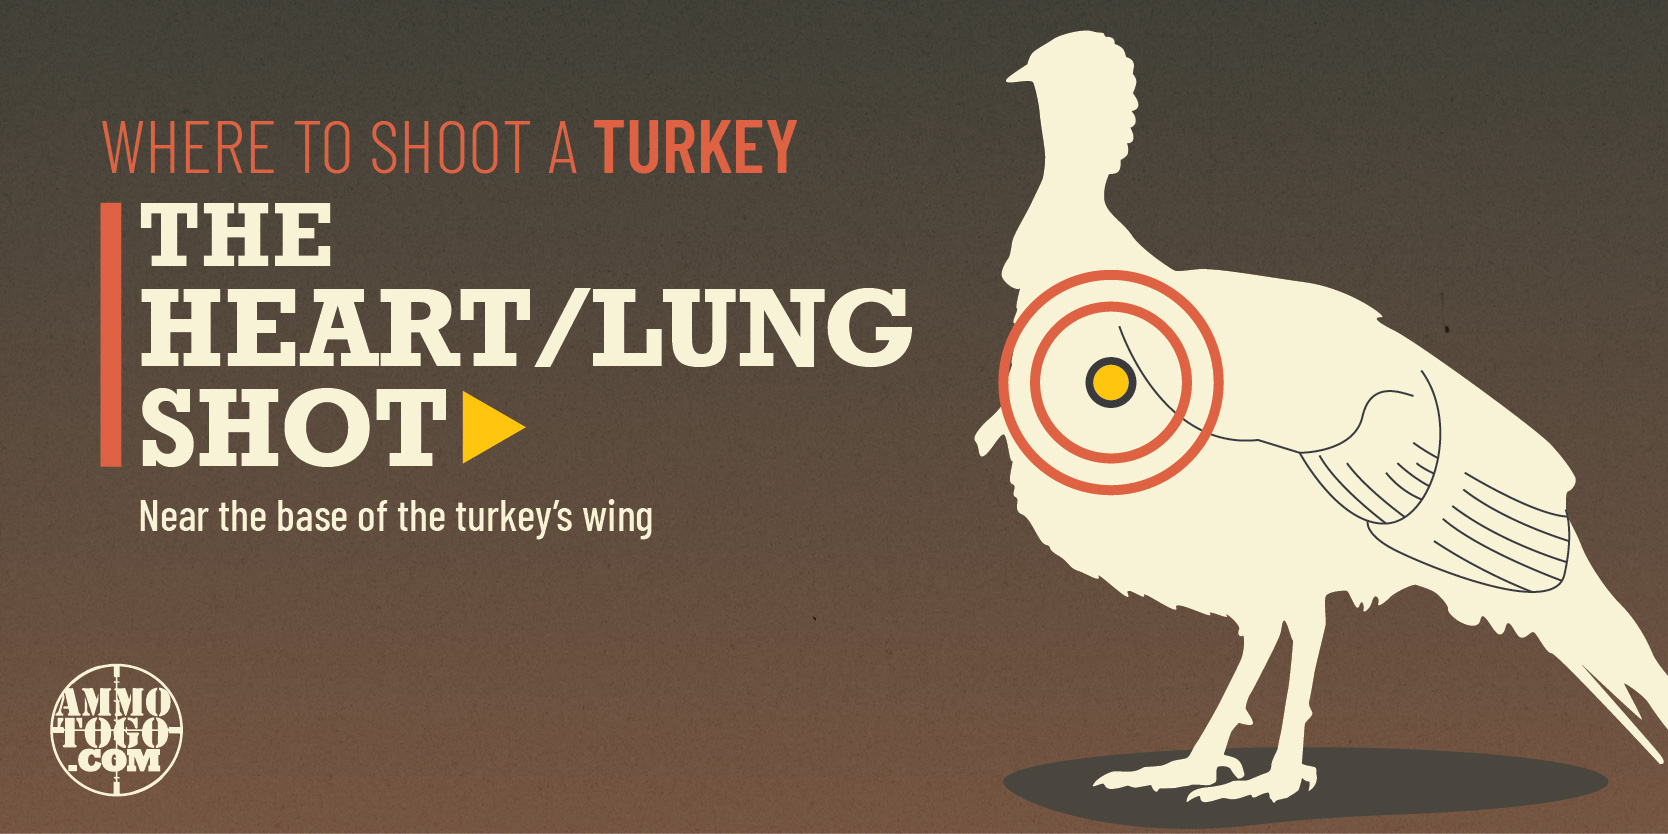 A diagram showing where to shoot a turkey with a bow and arrow